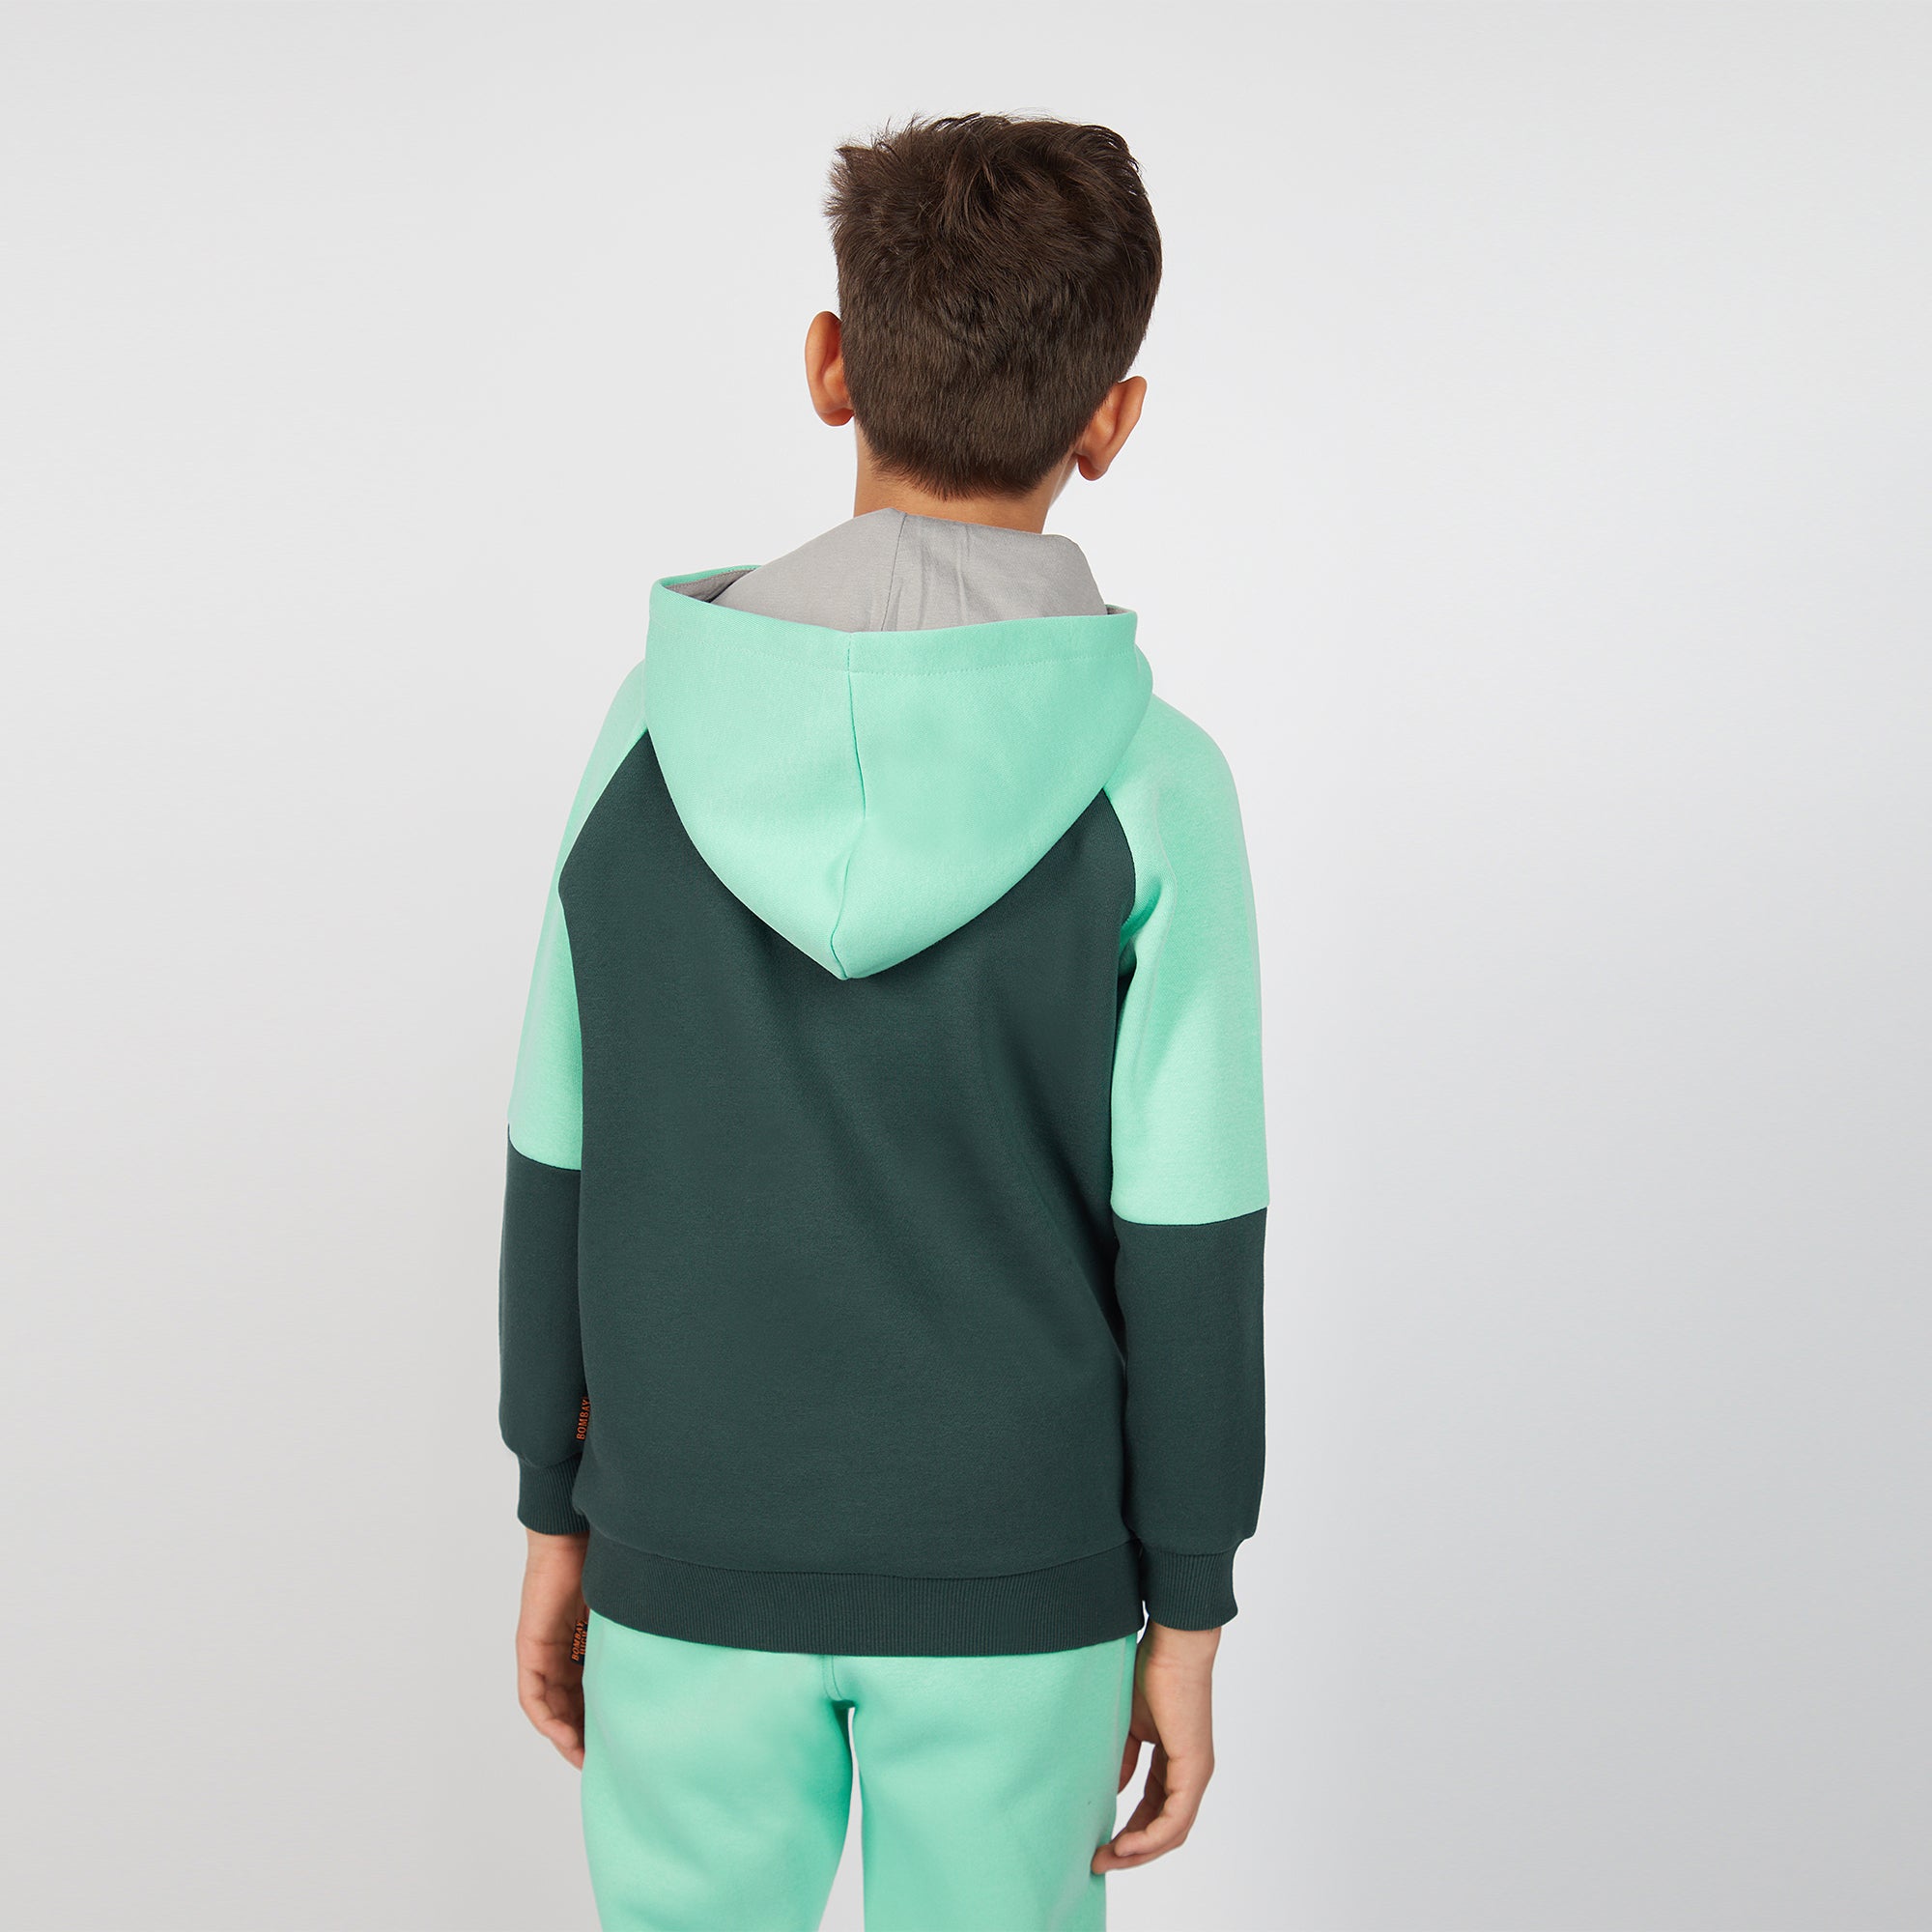 Bombay High Boy's Jungle Green Color Block Knit Zip-up Hoodie